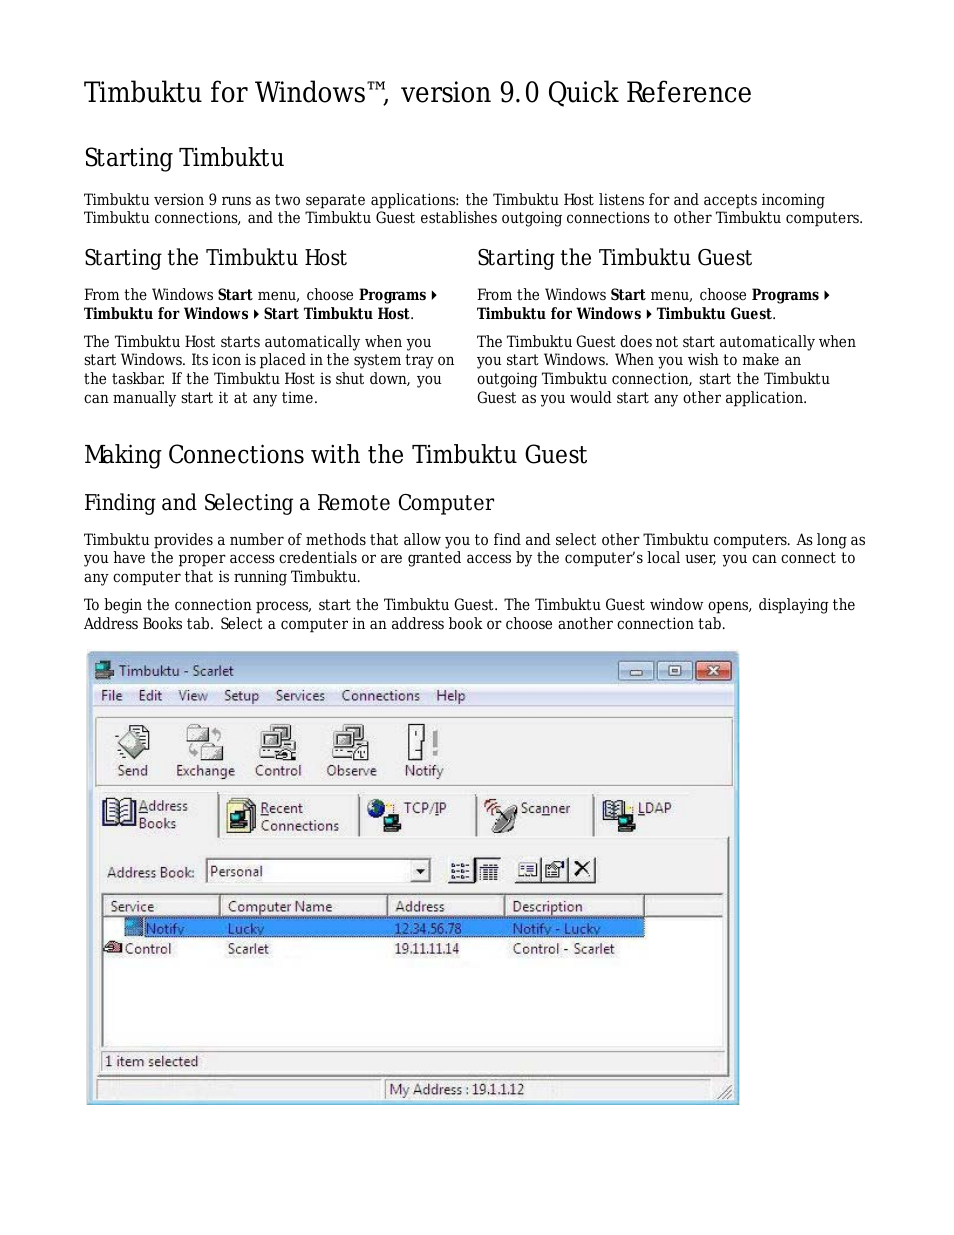 Timbuktu for Windows v9.0.5- At a Glance Guide